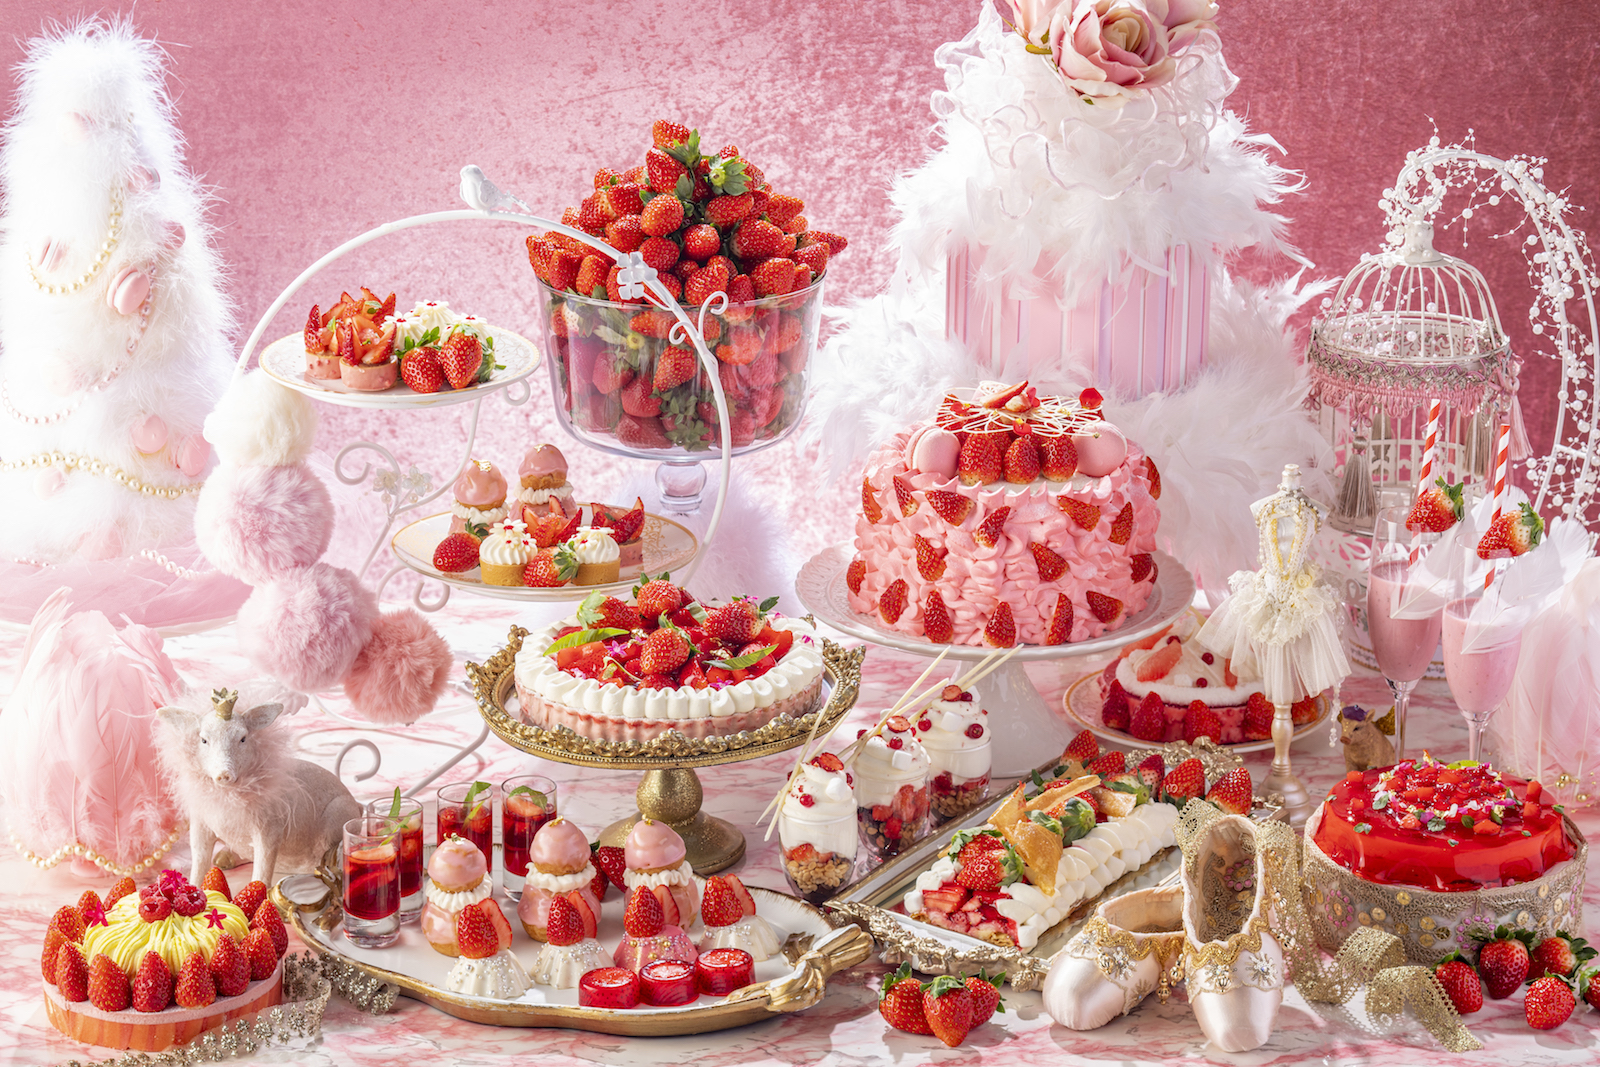 A grand strawberry affair for your Valentine at Hilton Tokyo Japan Today